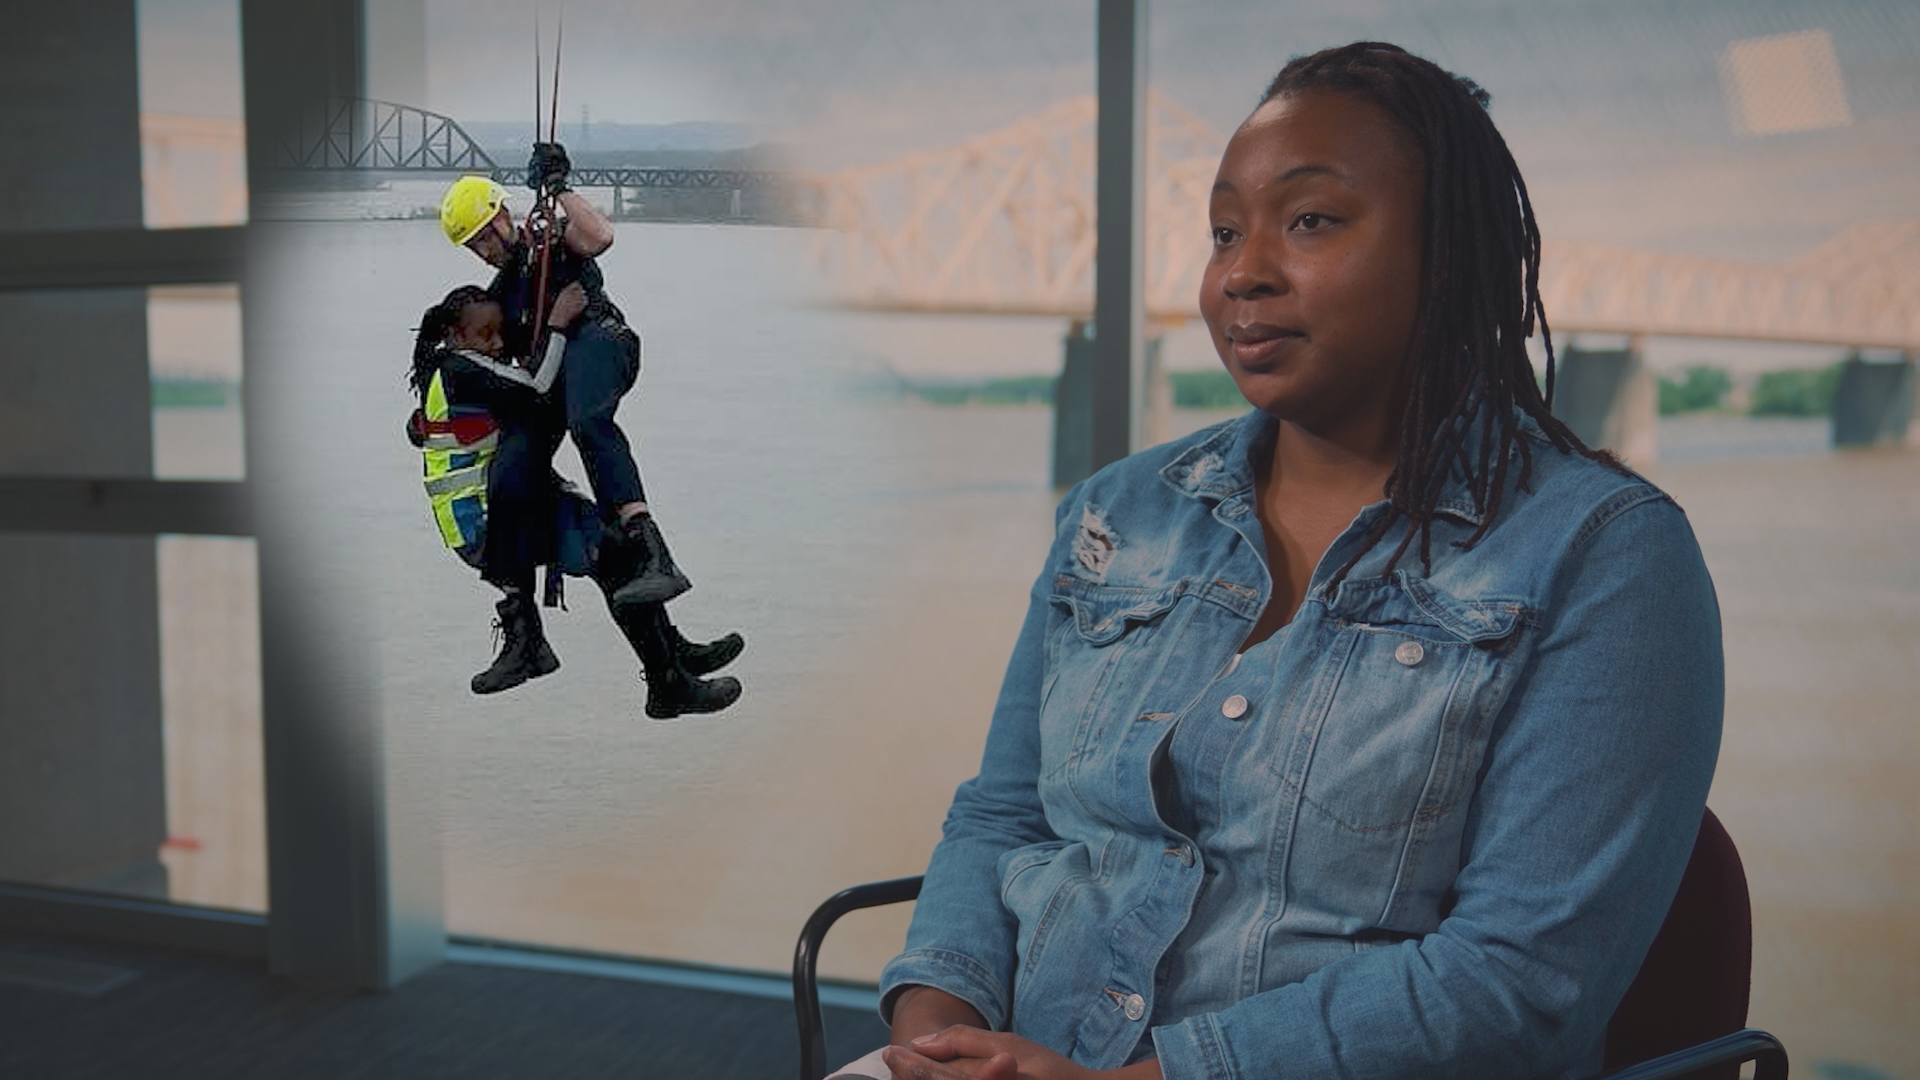 Sydney Thomas spent nearly an hour dangling over the Ohio River after a serious crash on a Louisville bridge in March. For the first time, she's sharing her story.